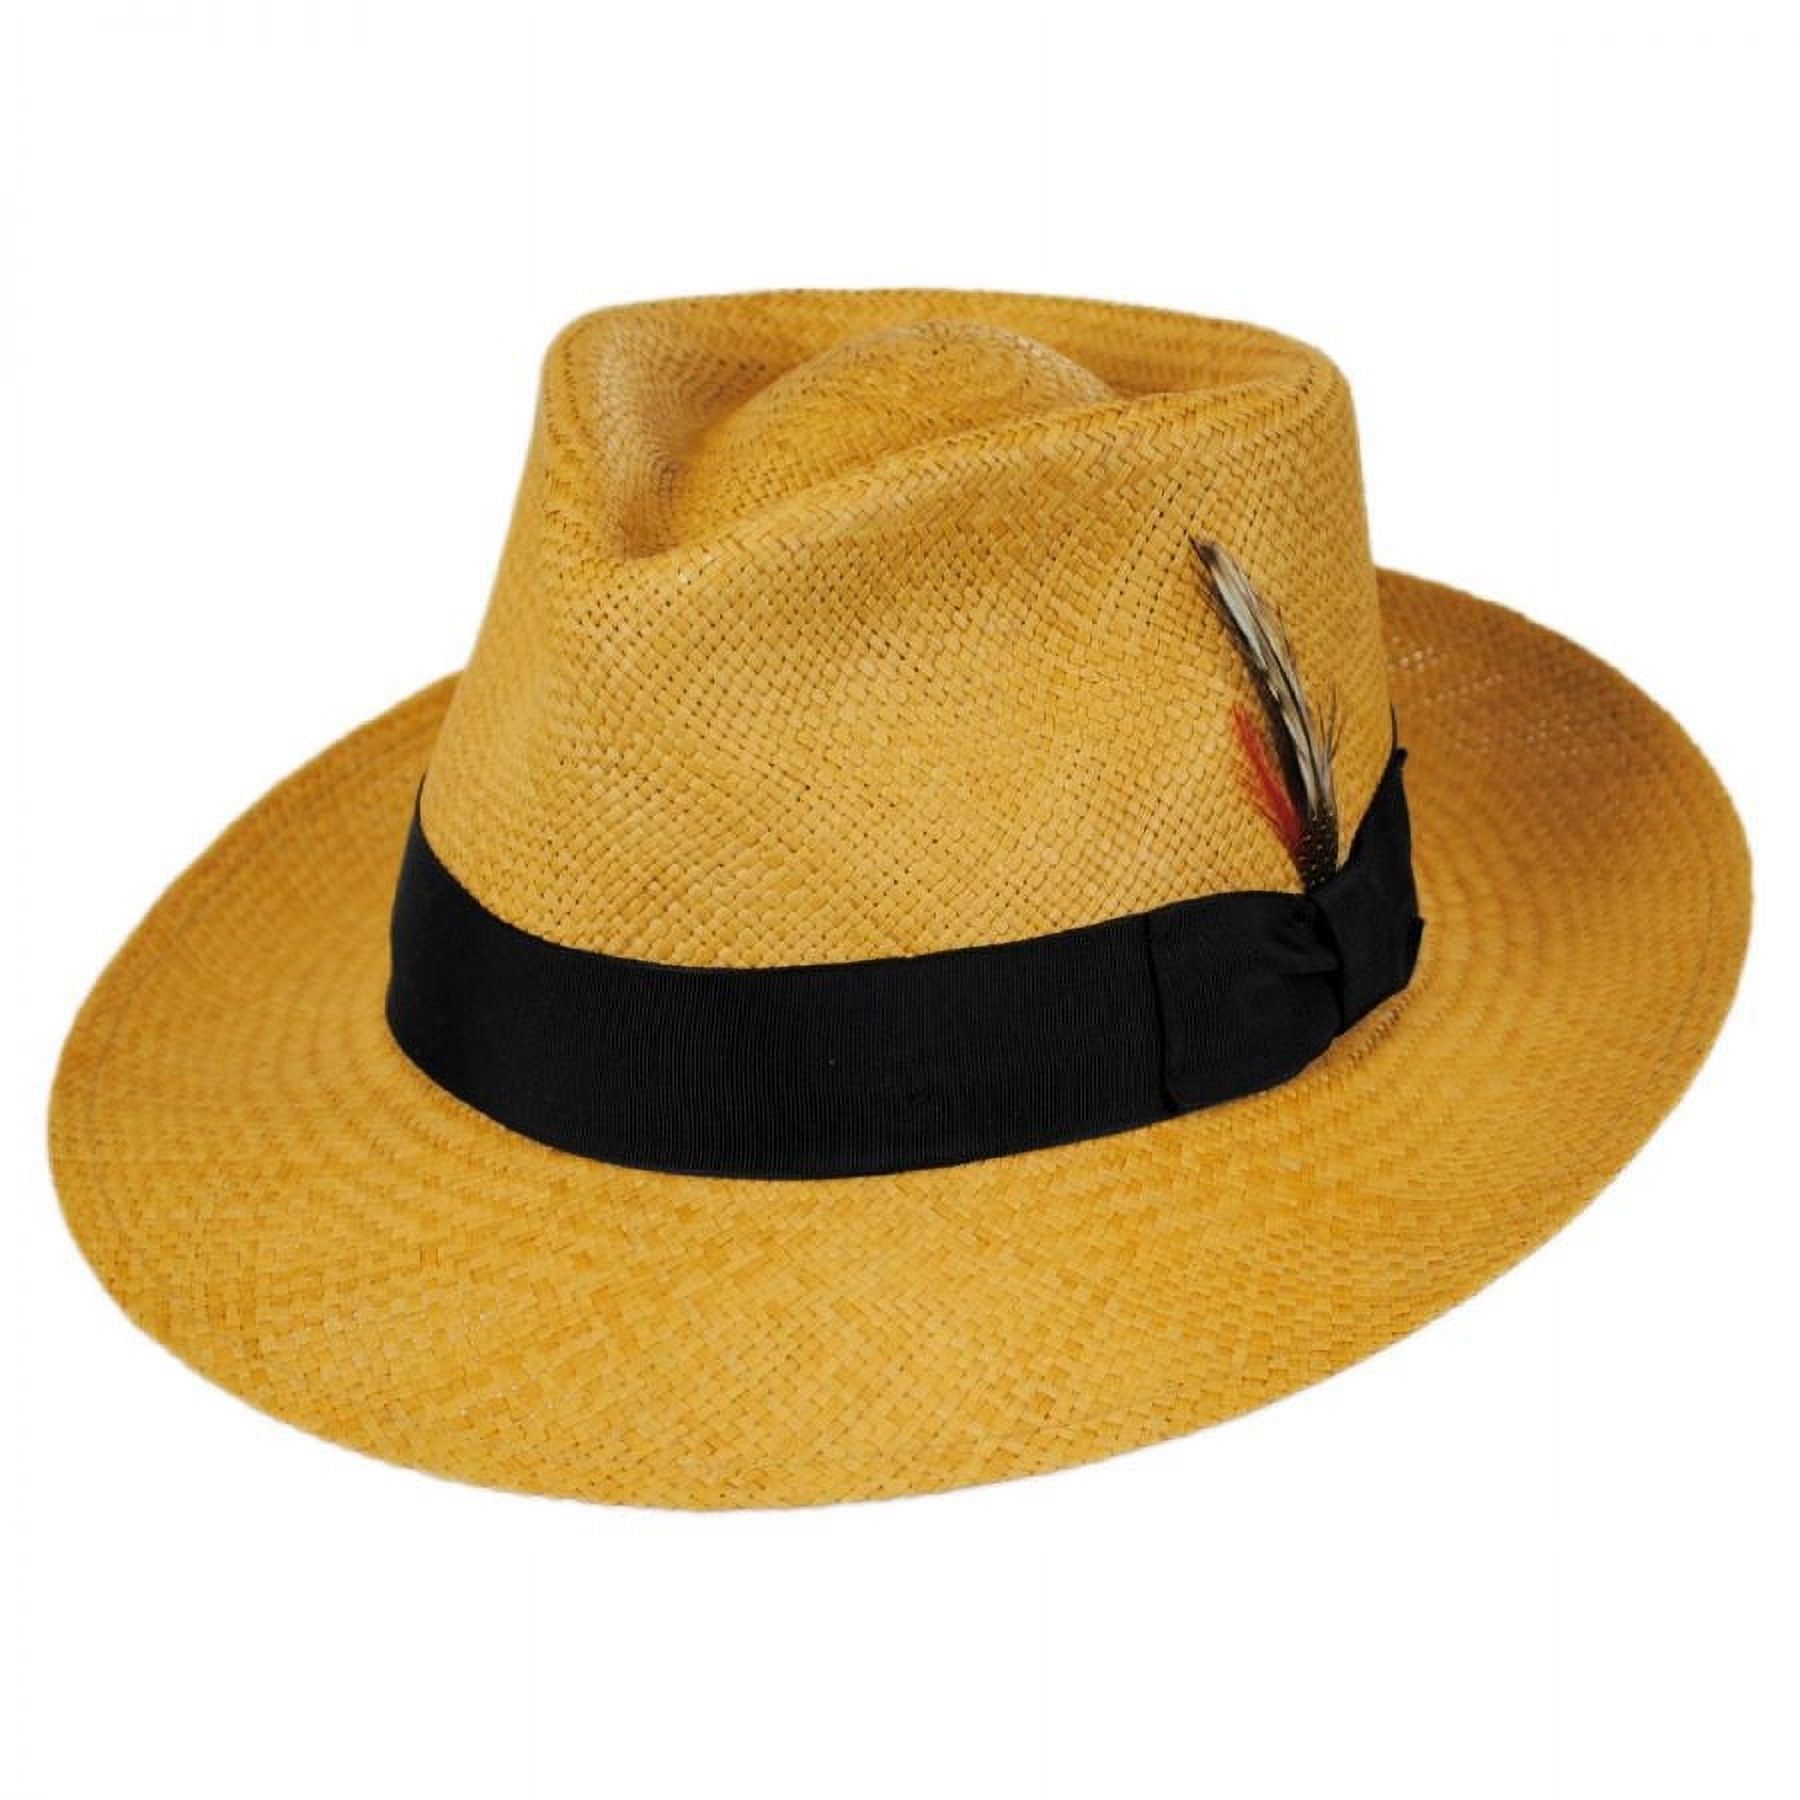 Stain Repellent Panama Straw C-Crown Fedora Hat - M - Putty - image 1 of 4